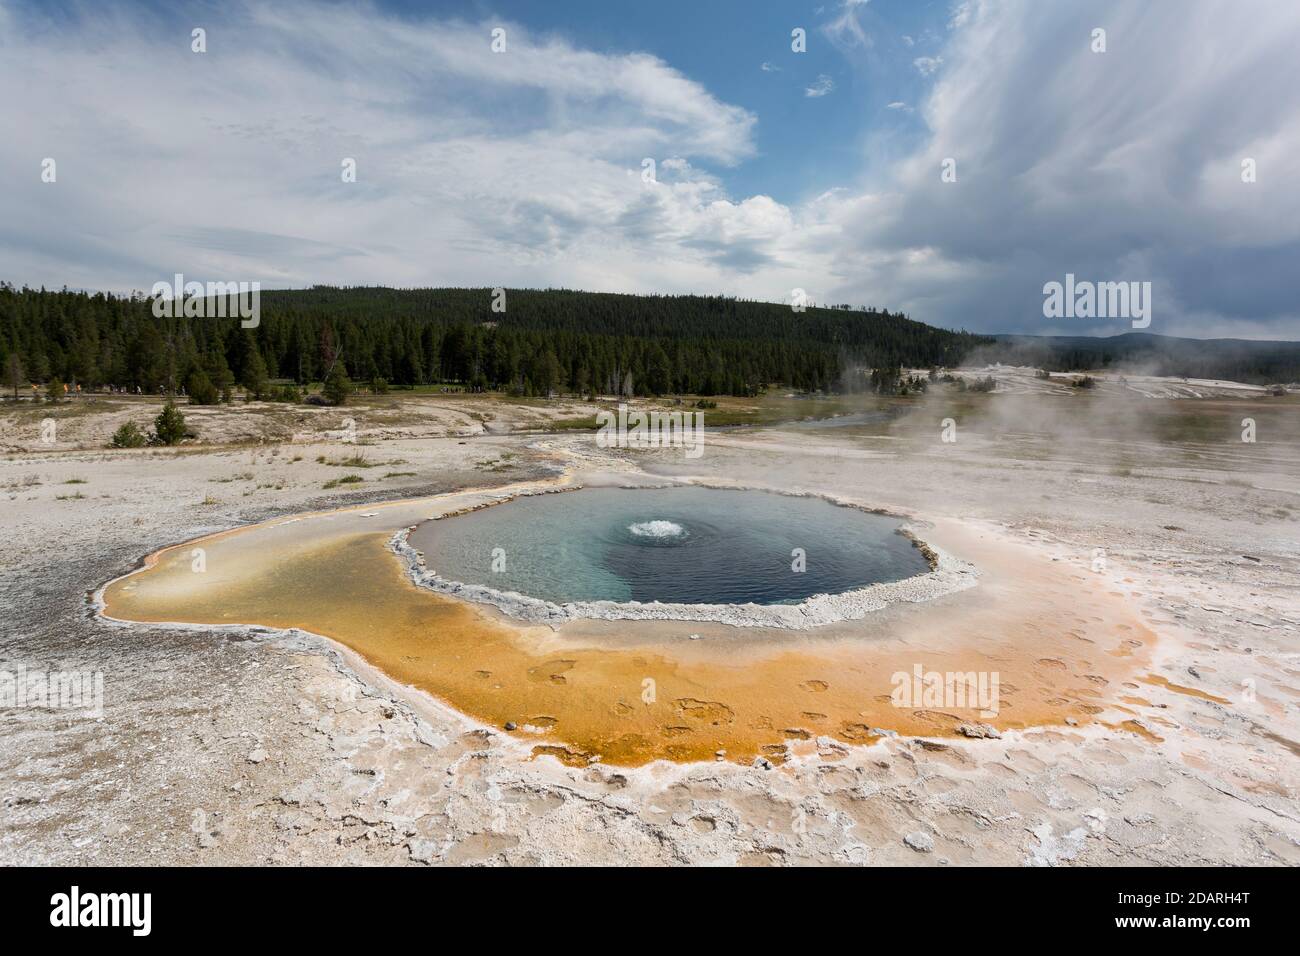 View of Crested Pool hot spring along the Upper Geyser Basin Trail in Yellowstone National Park, Wyoming on Monday, August 3, 2020. The park recently Stock Photo